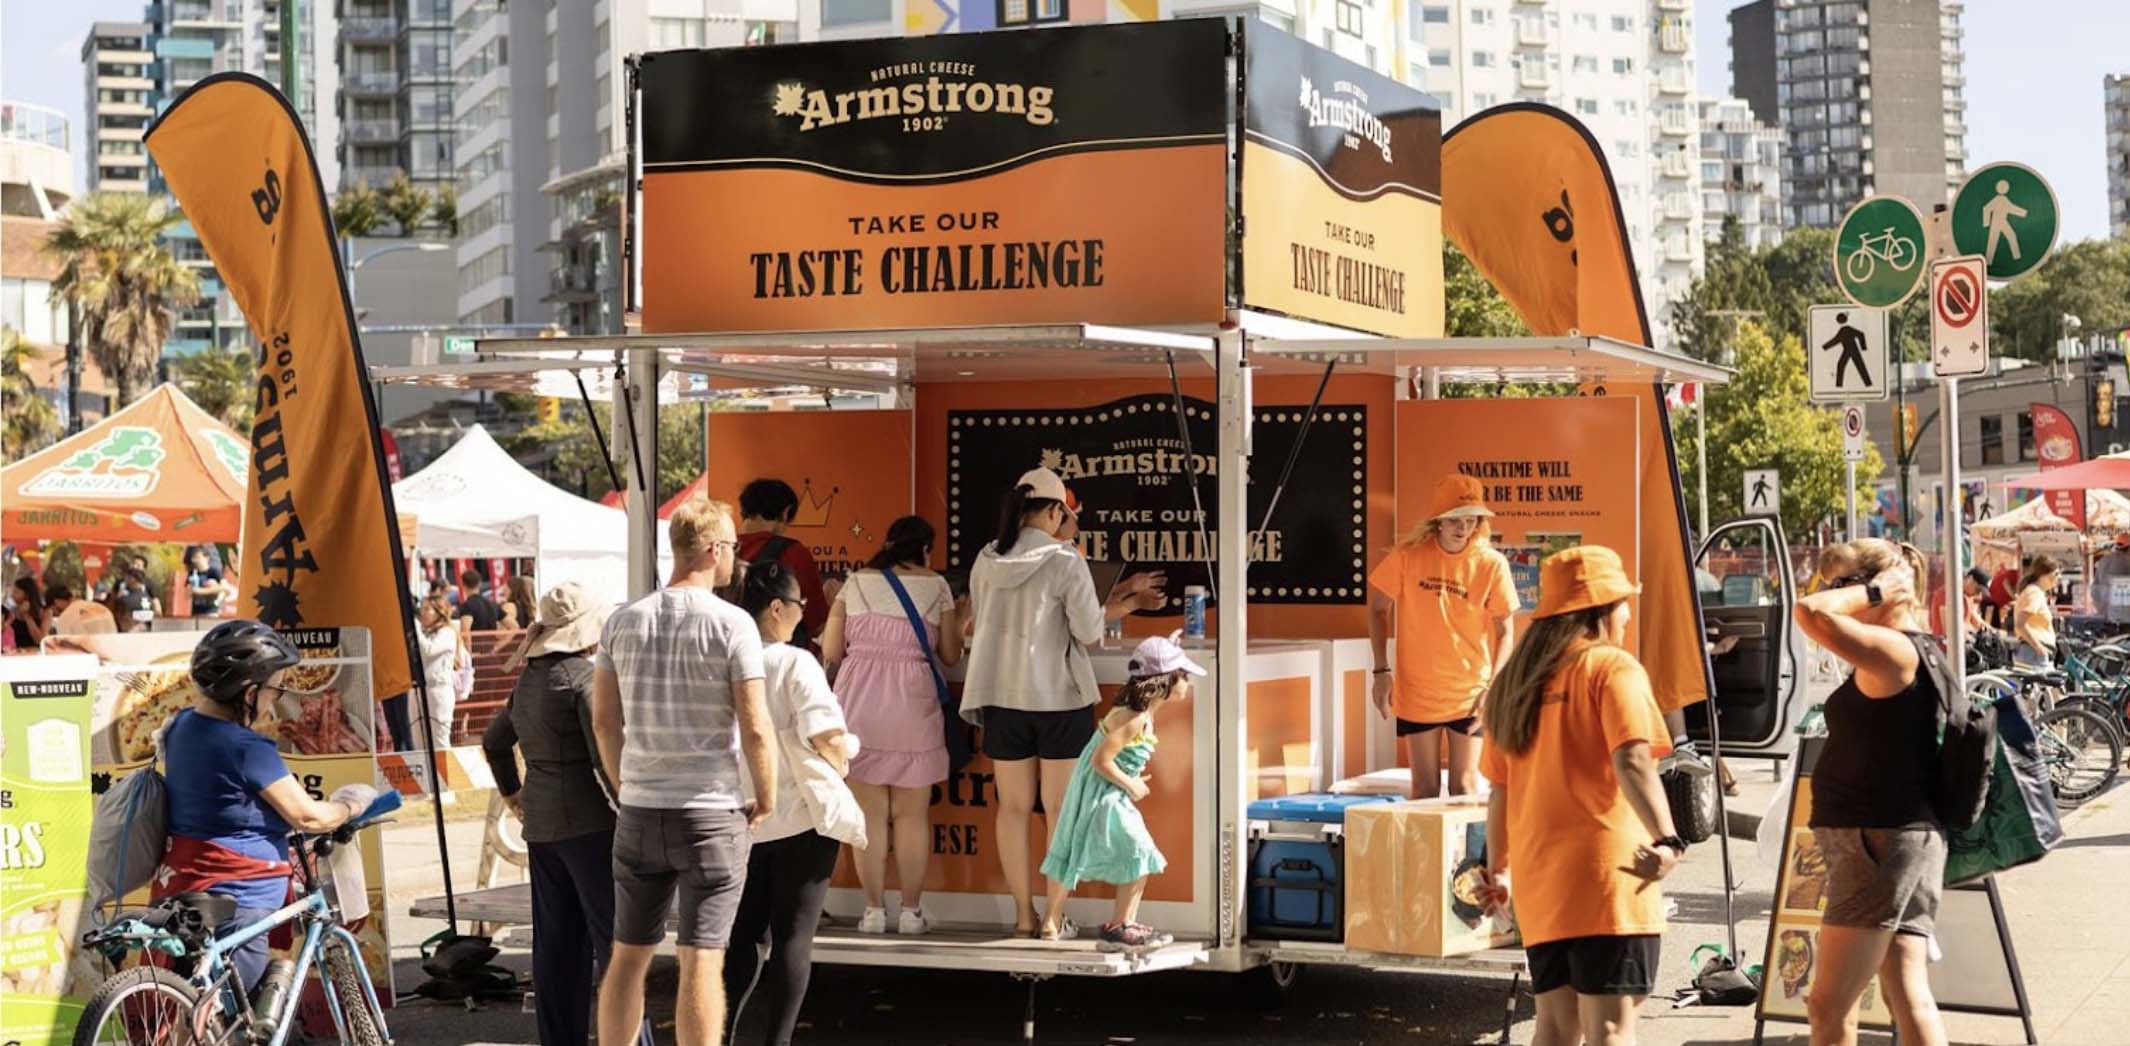 Armstrong Cheese Taste Challenge